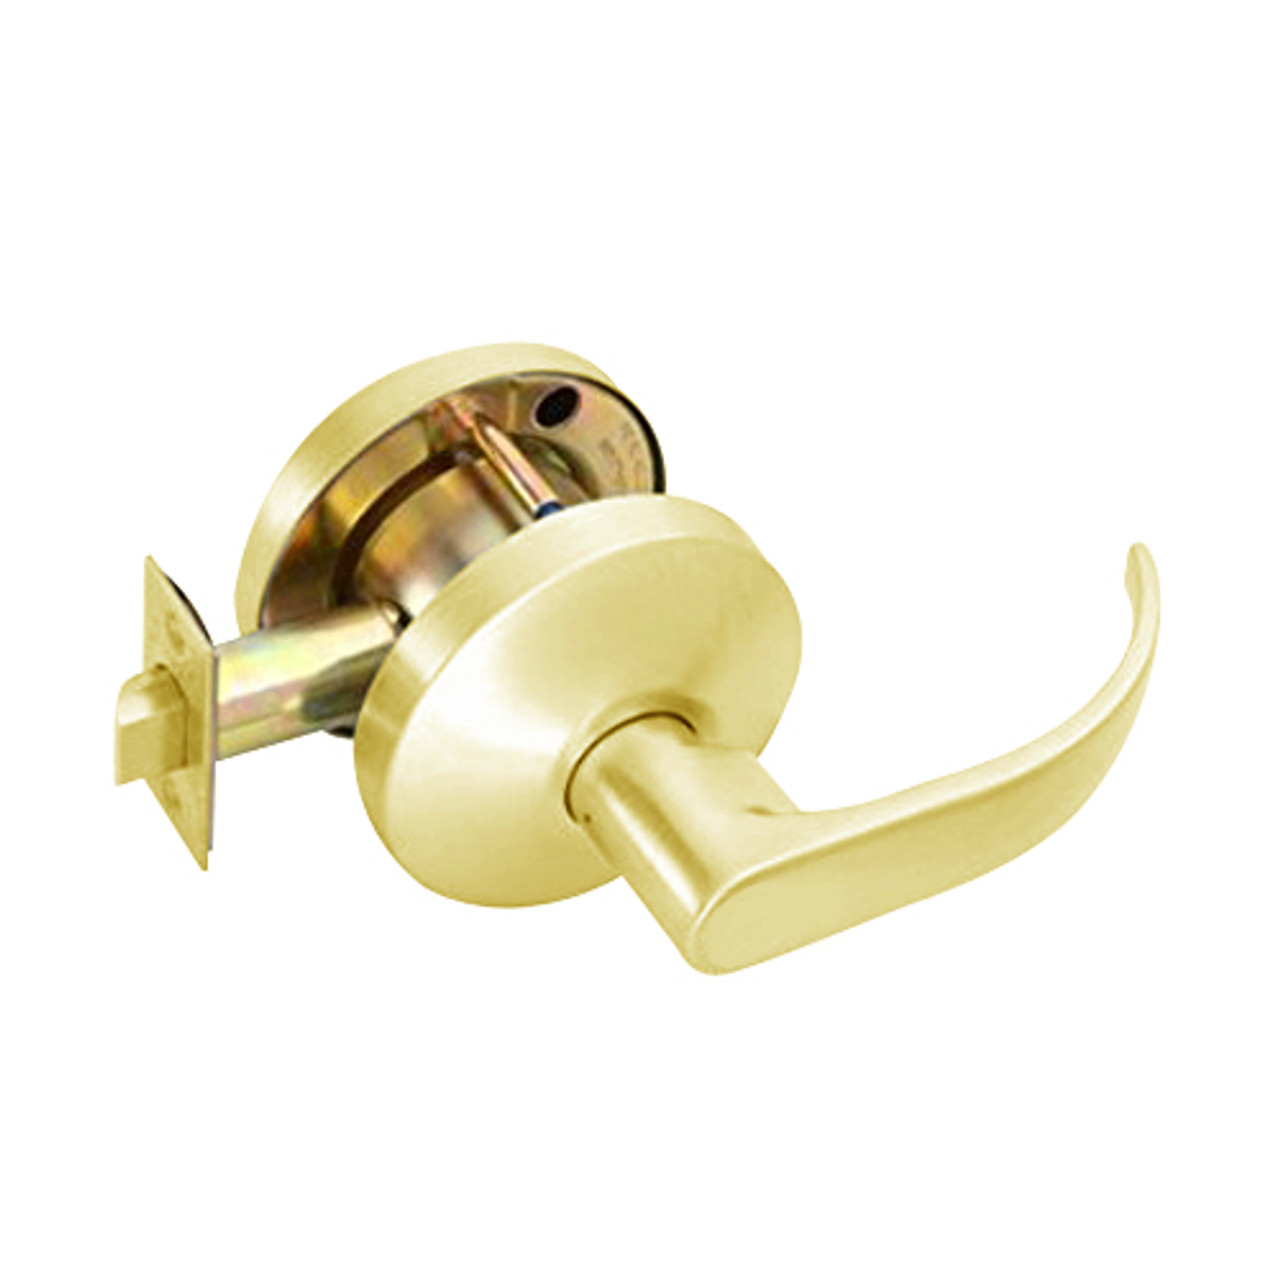 B161D-Q-605 Falcon B Series Non-Keyed Cylinder Communicating Latch with Quantum Lever Style in Bright Brass Finish